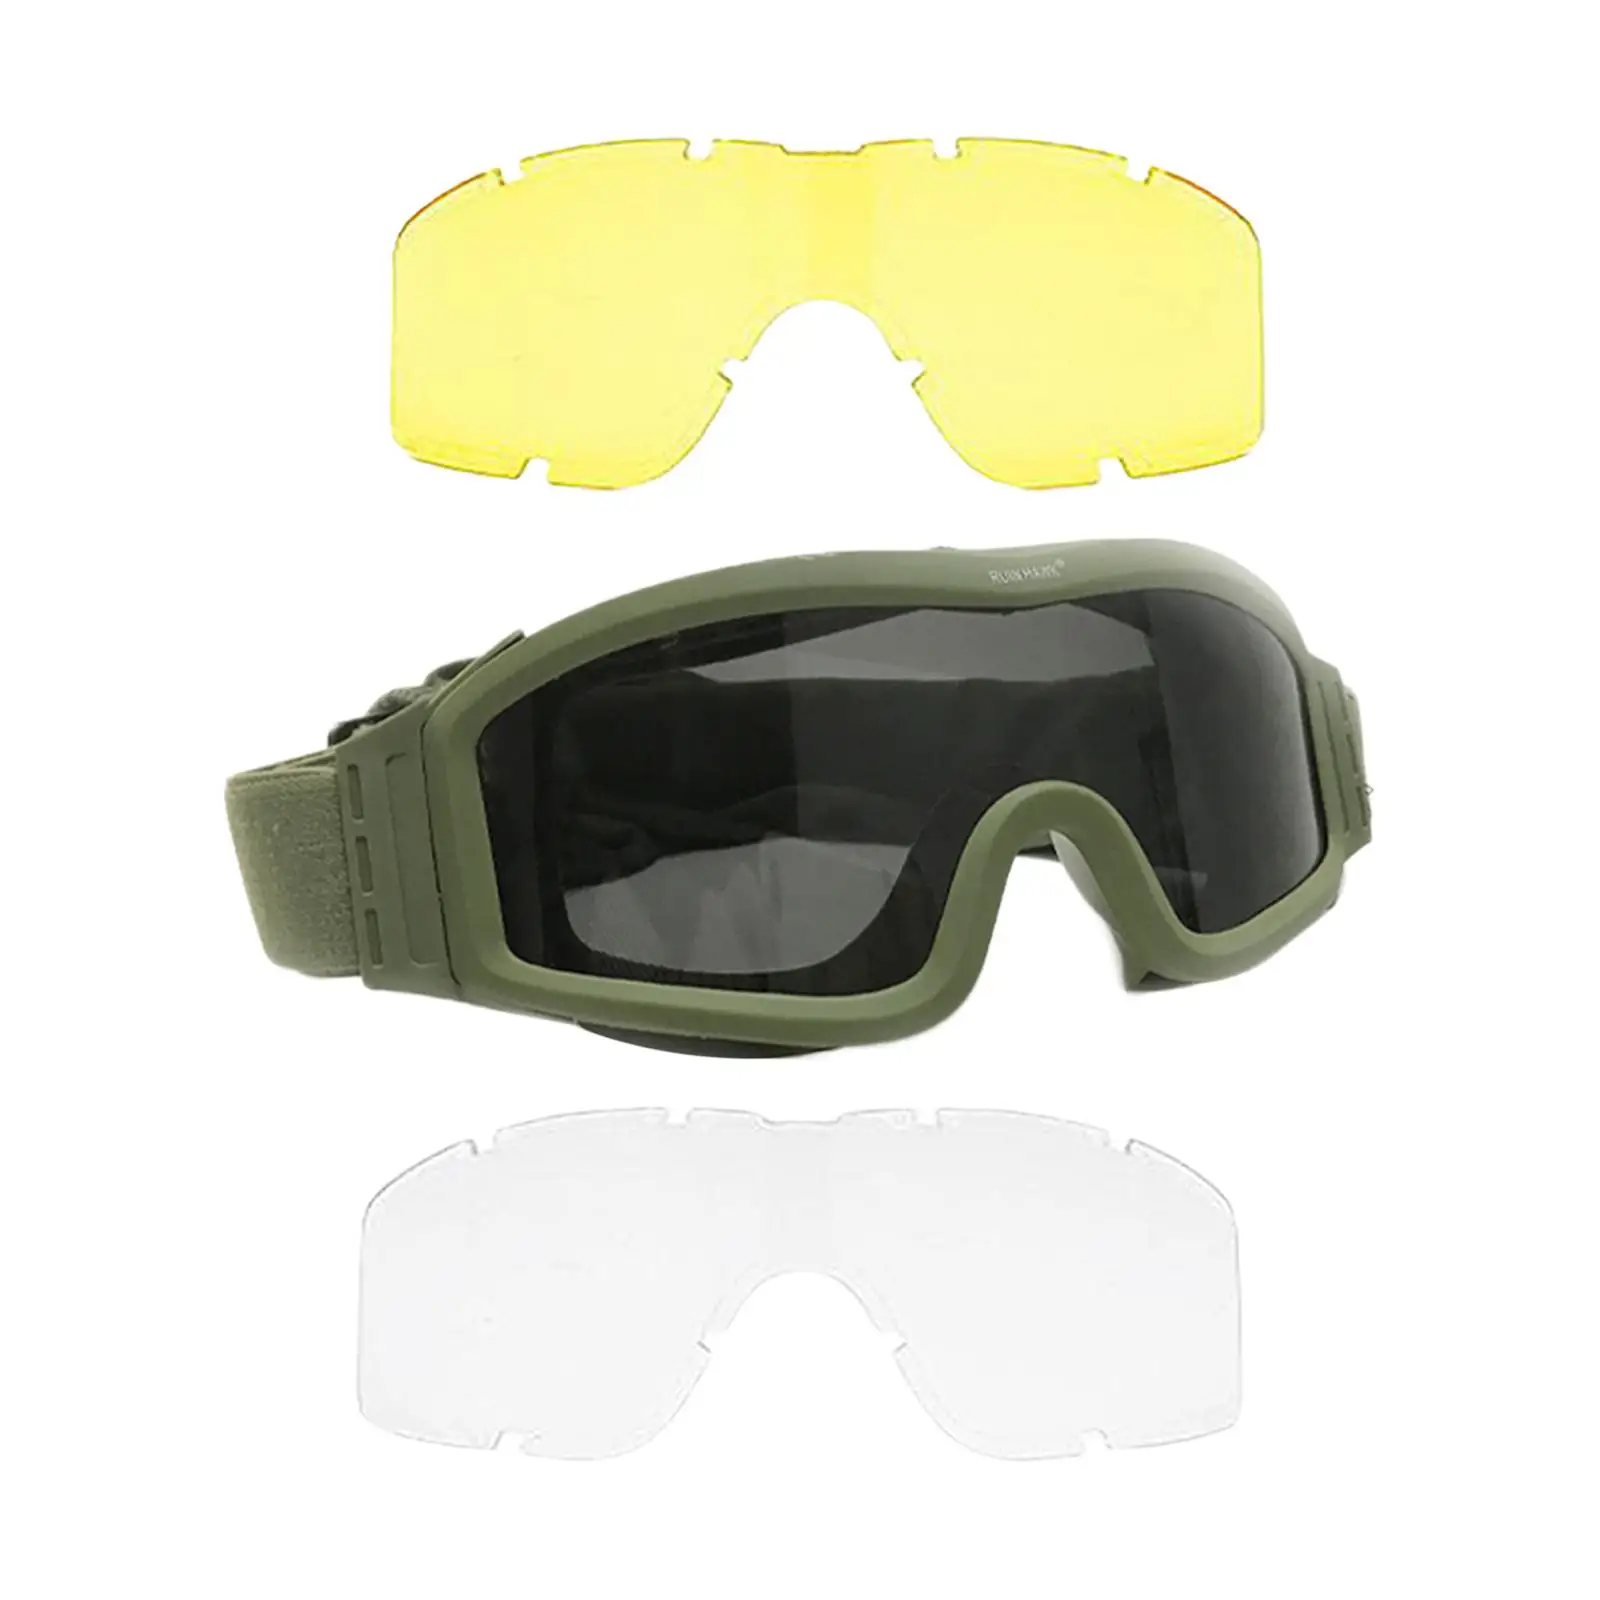 Goggles Glasses Scratch Resistant Adjustable Dustproof for Cycling Locust Combat